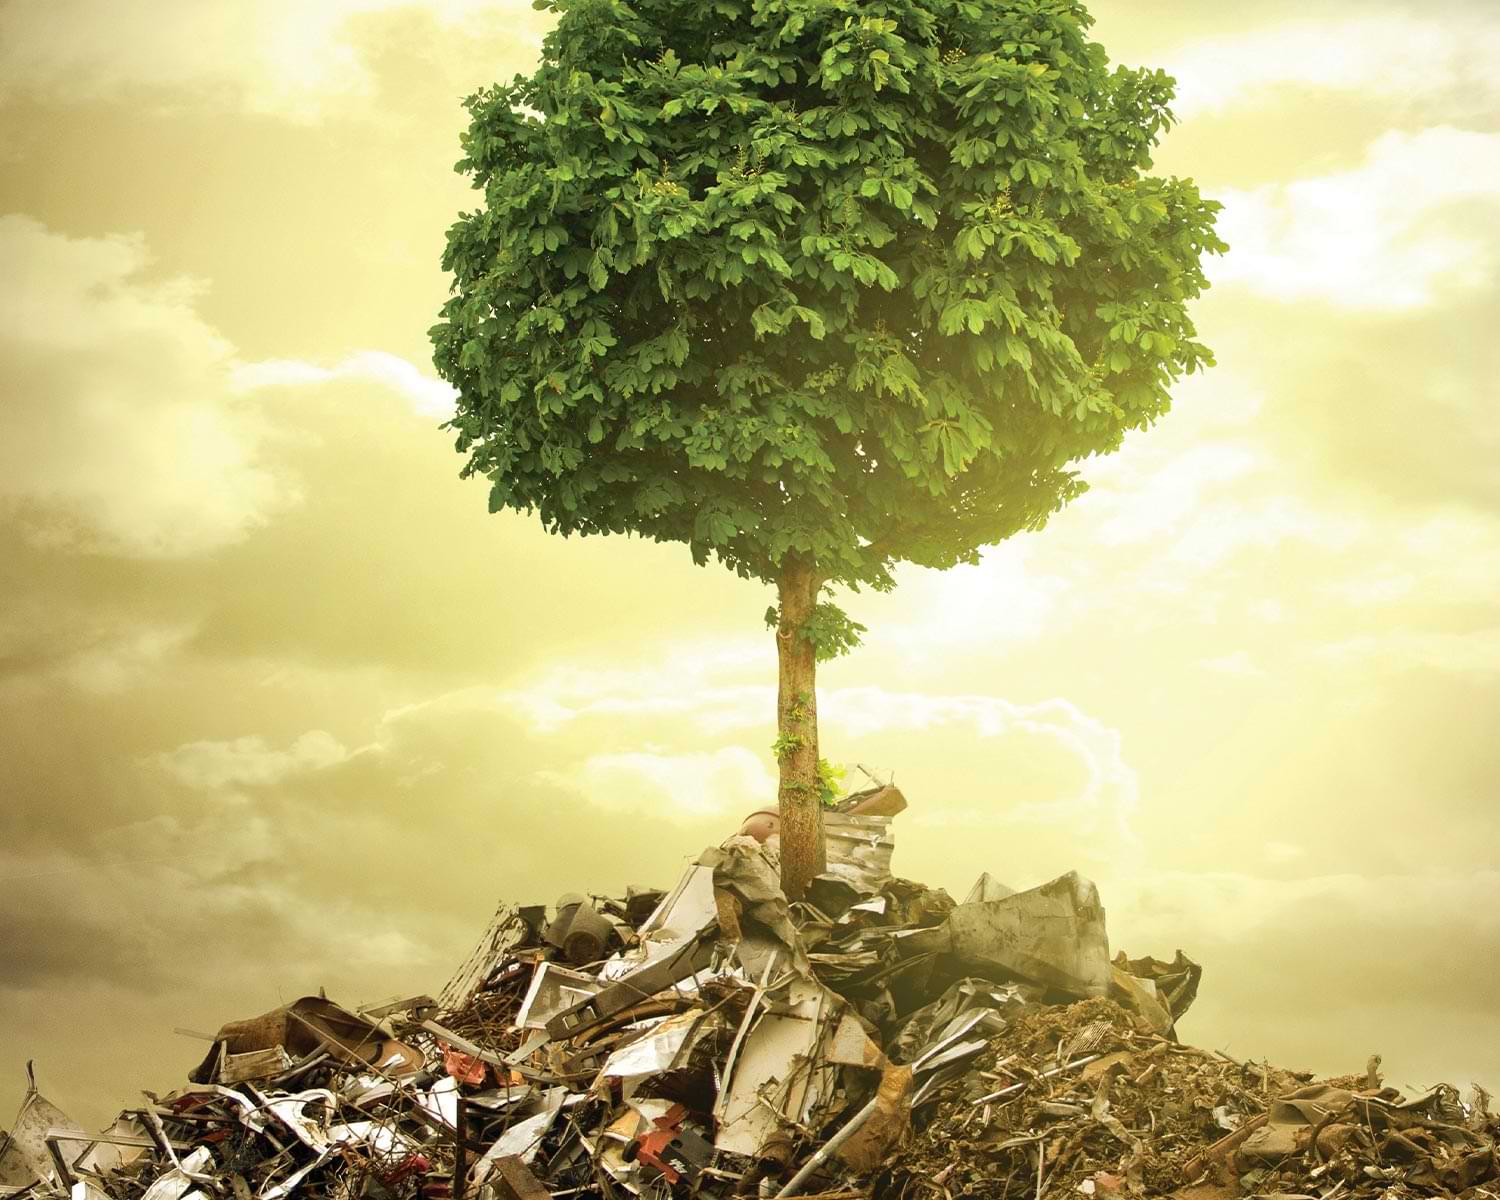 a tree grows from a large pile of rubbish against a bright sunset